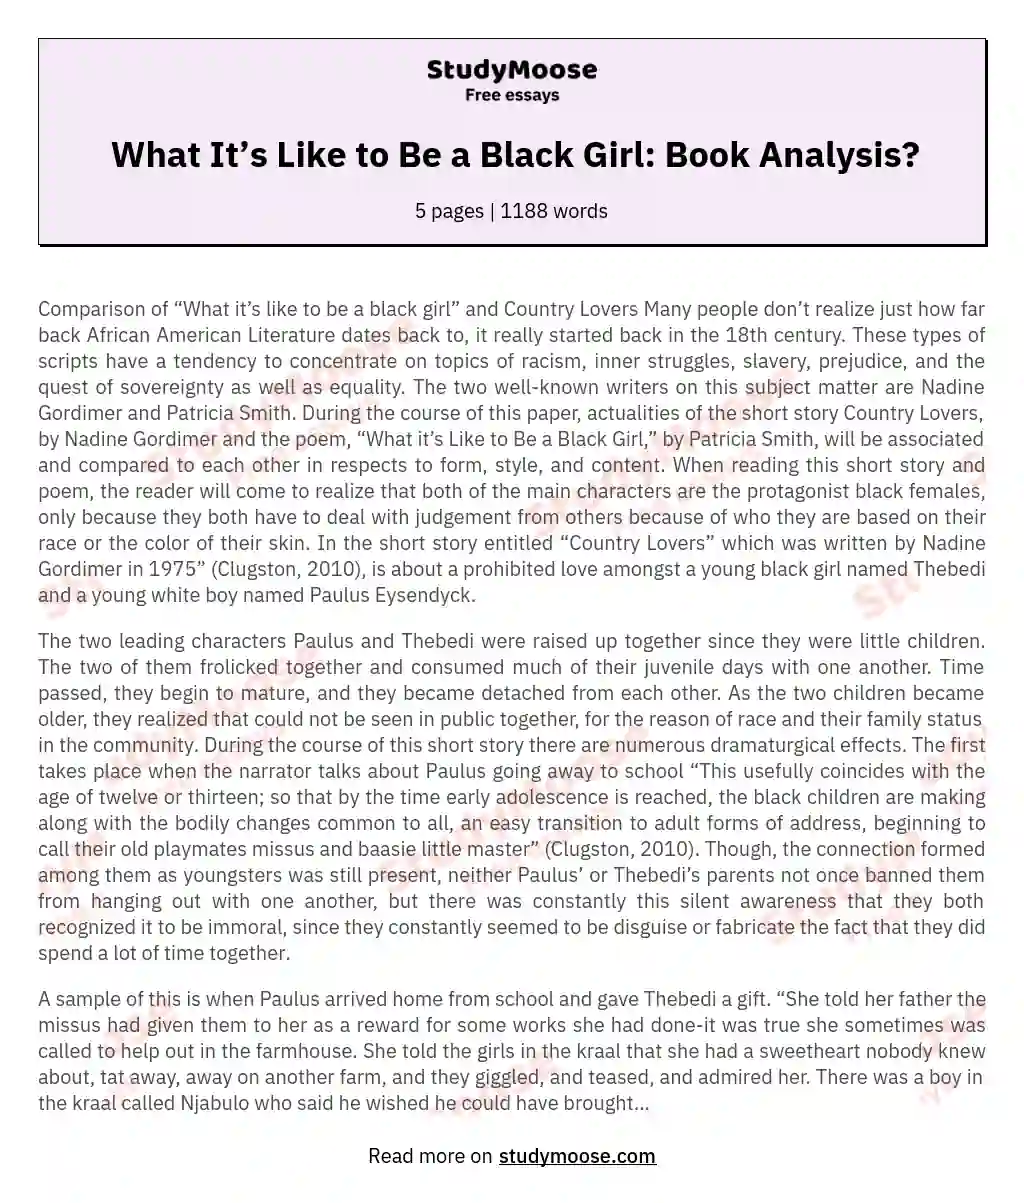 What It’s Like to Be a Black Girl: Book Analysis? essay